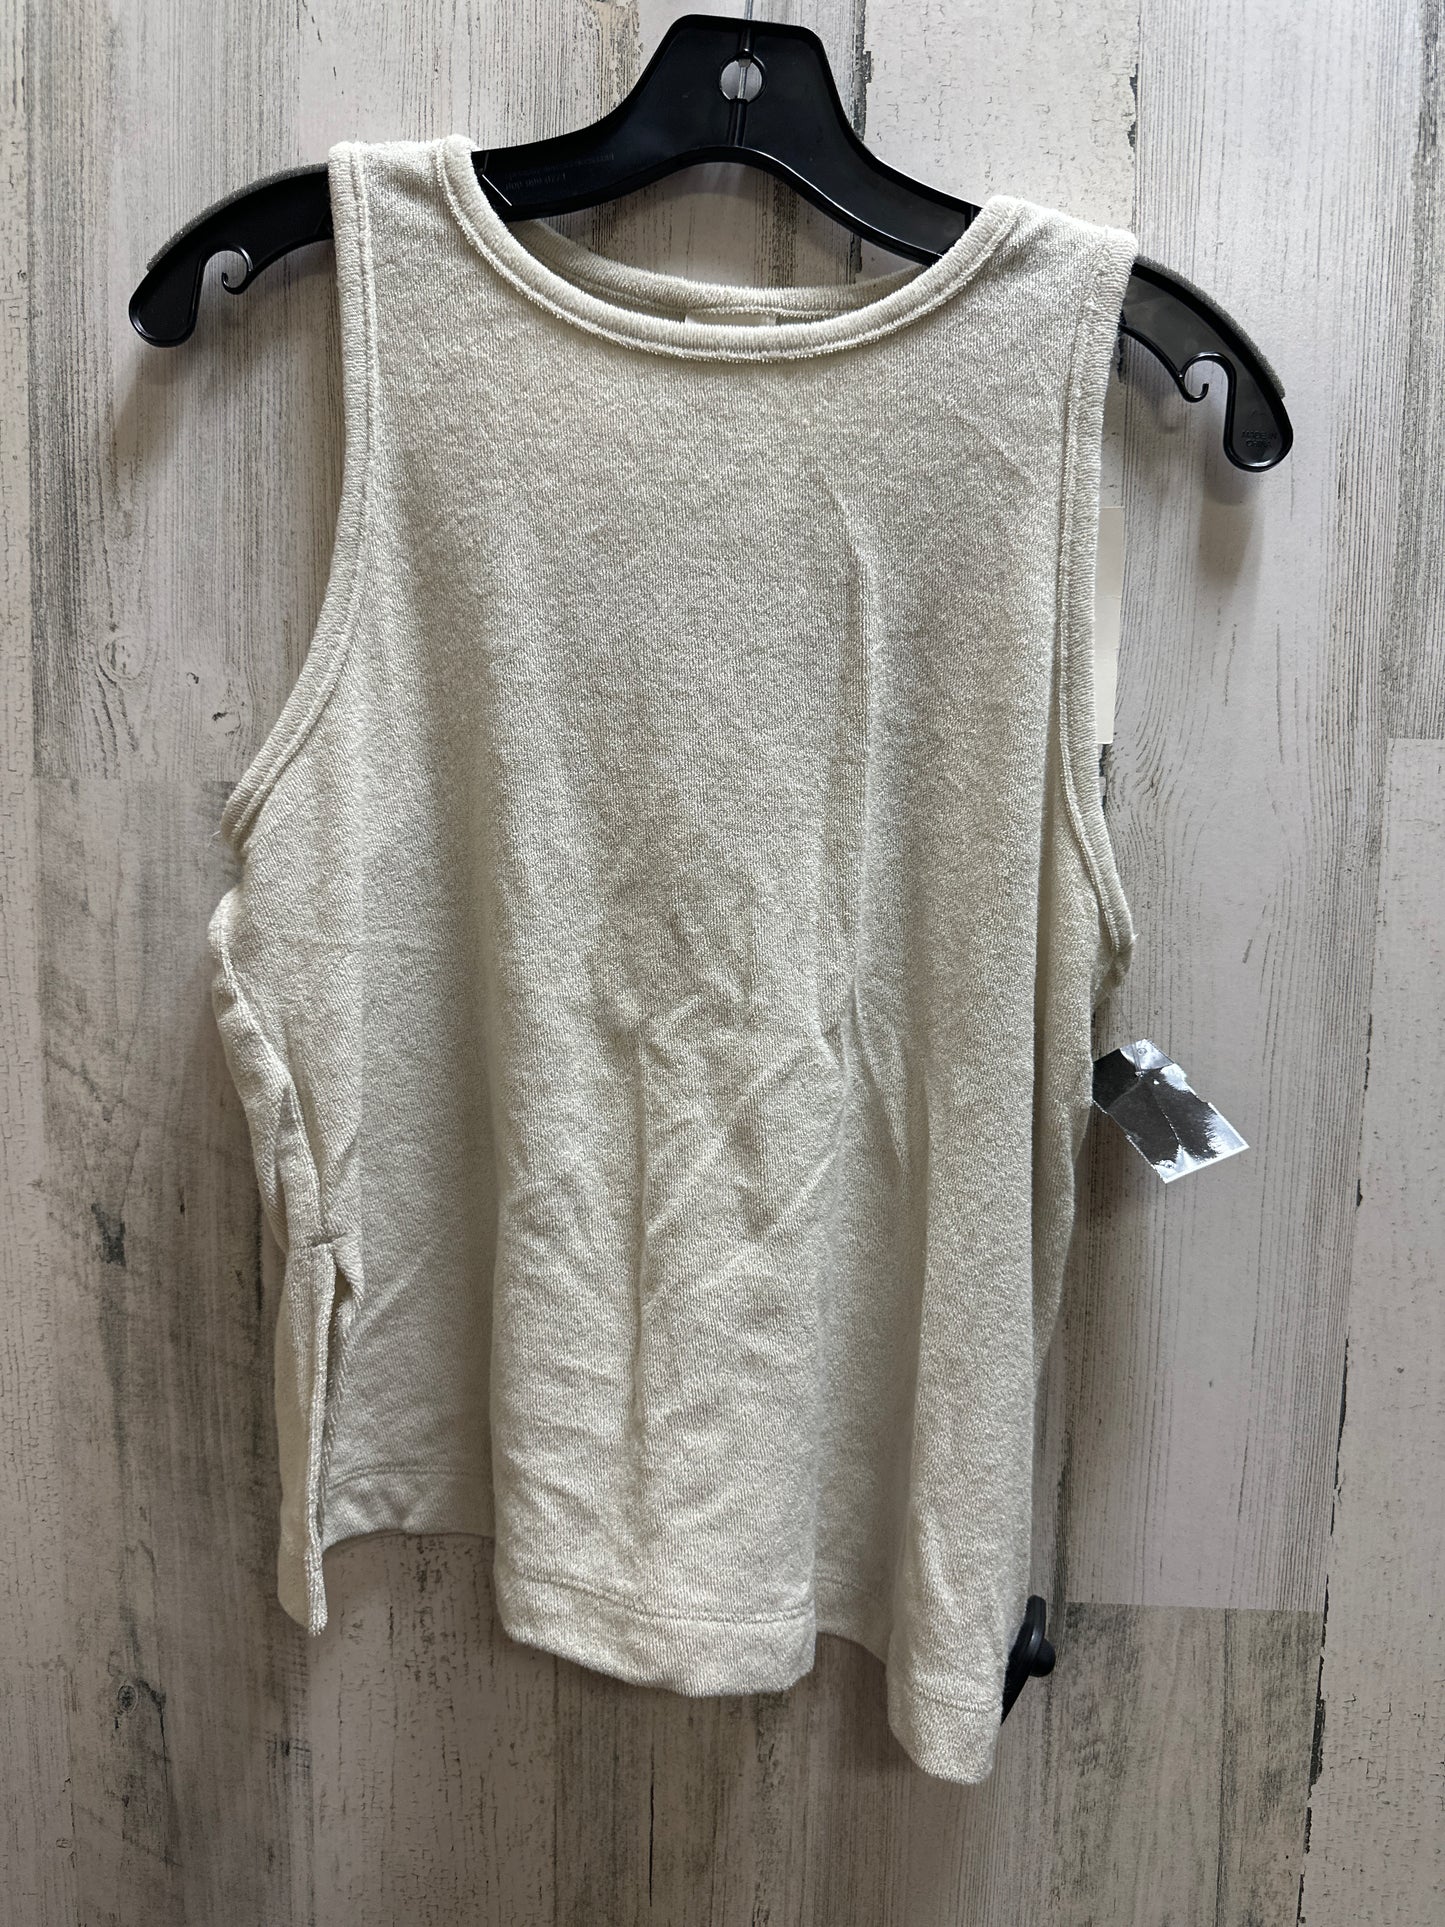 Tan Top Sleeveless A New Day, Size S